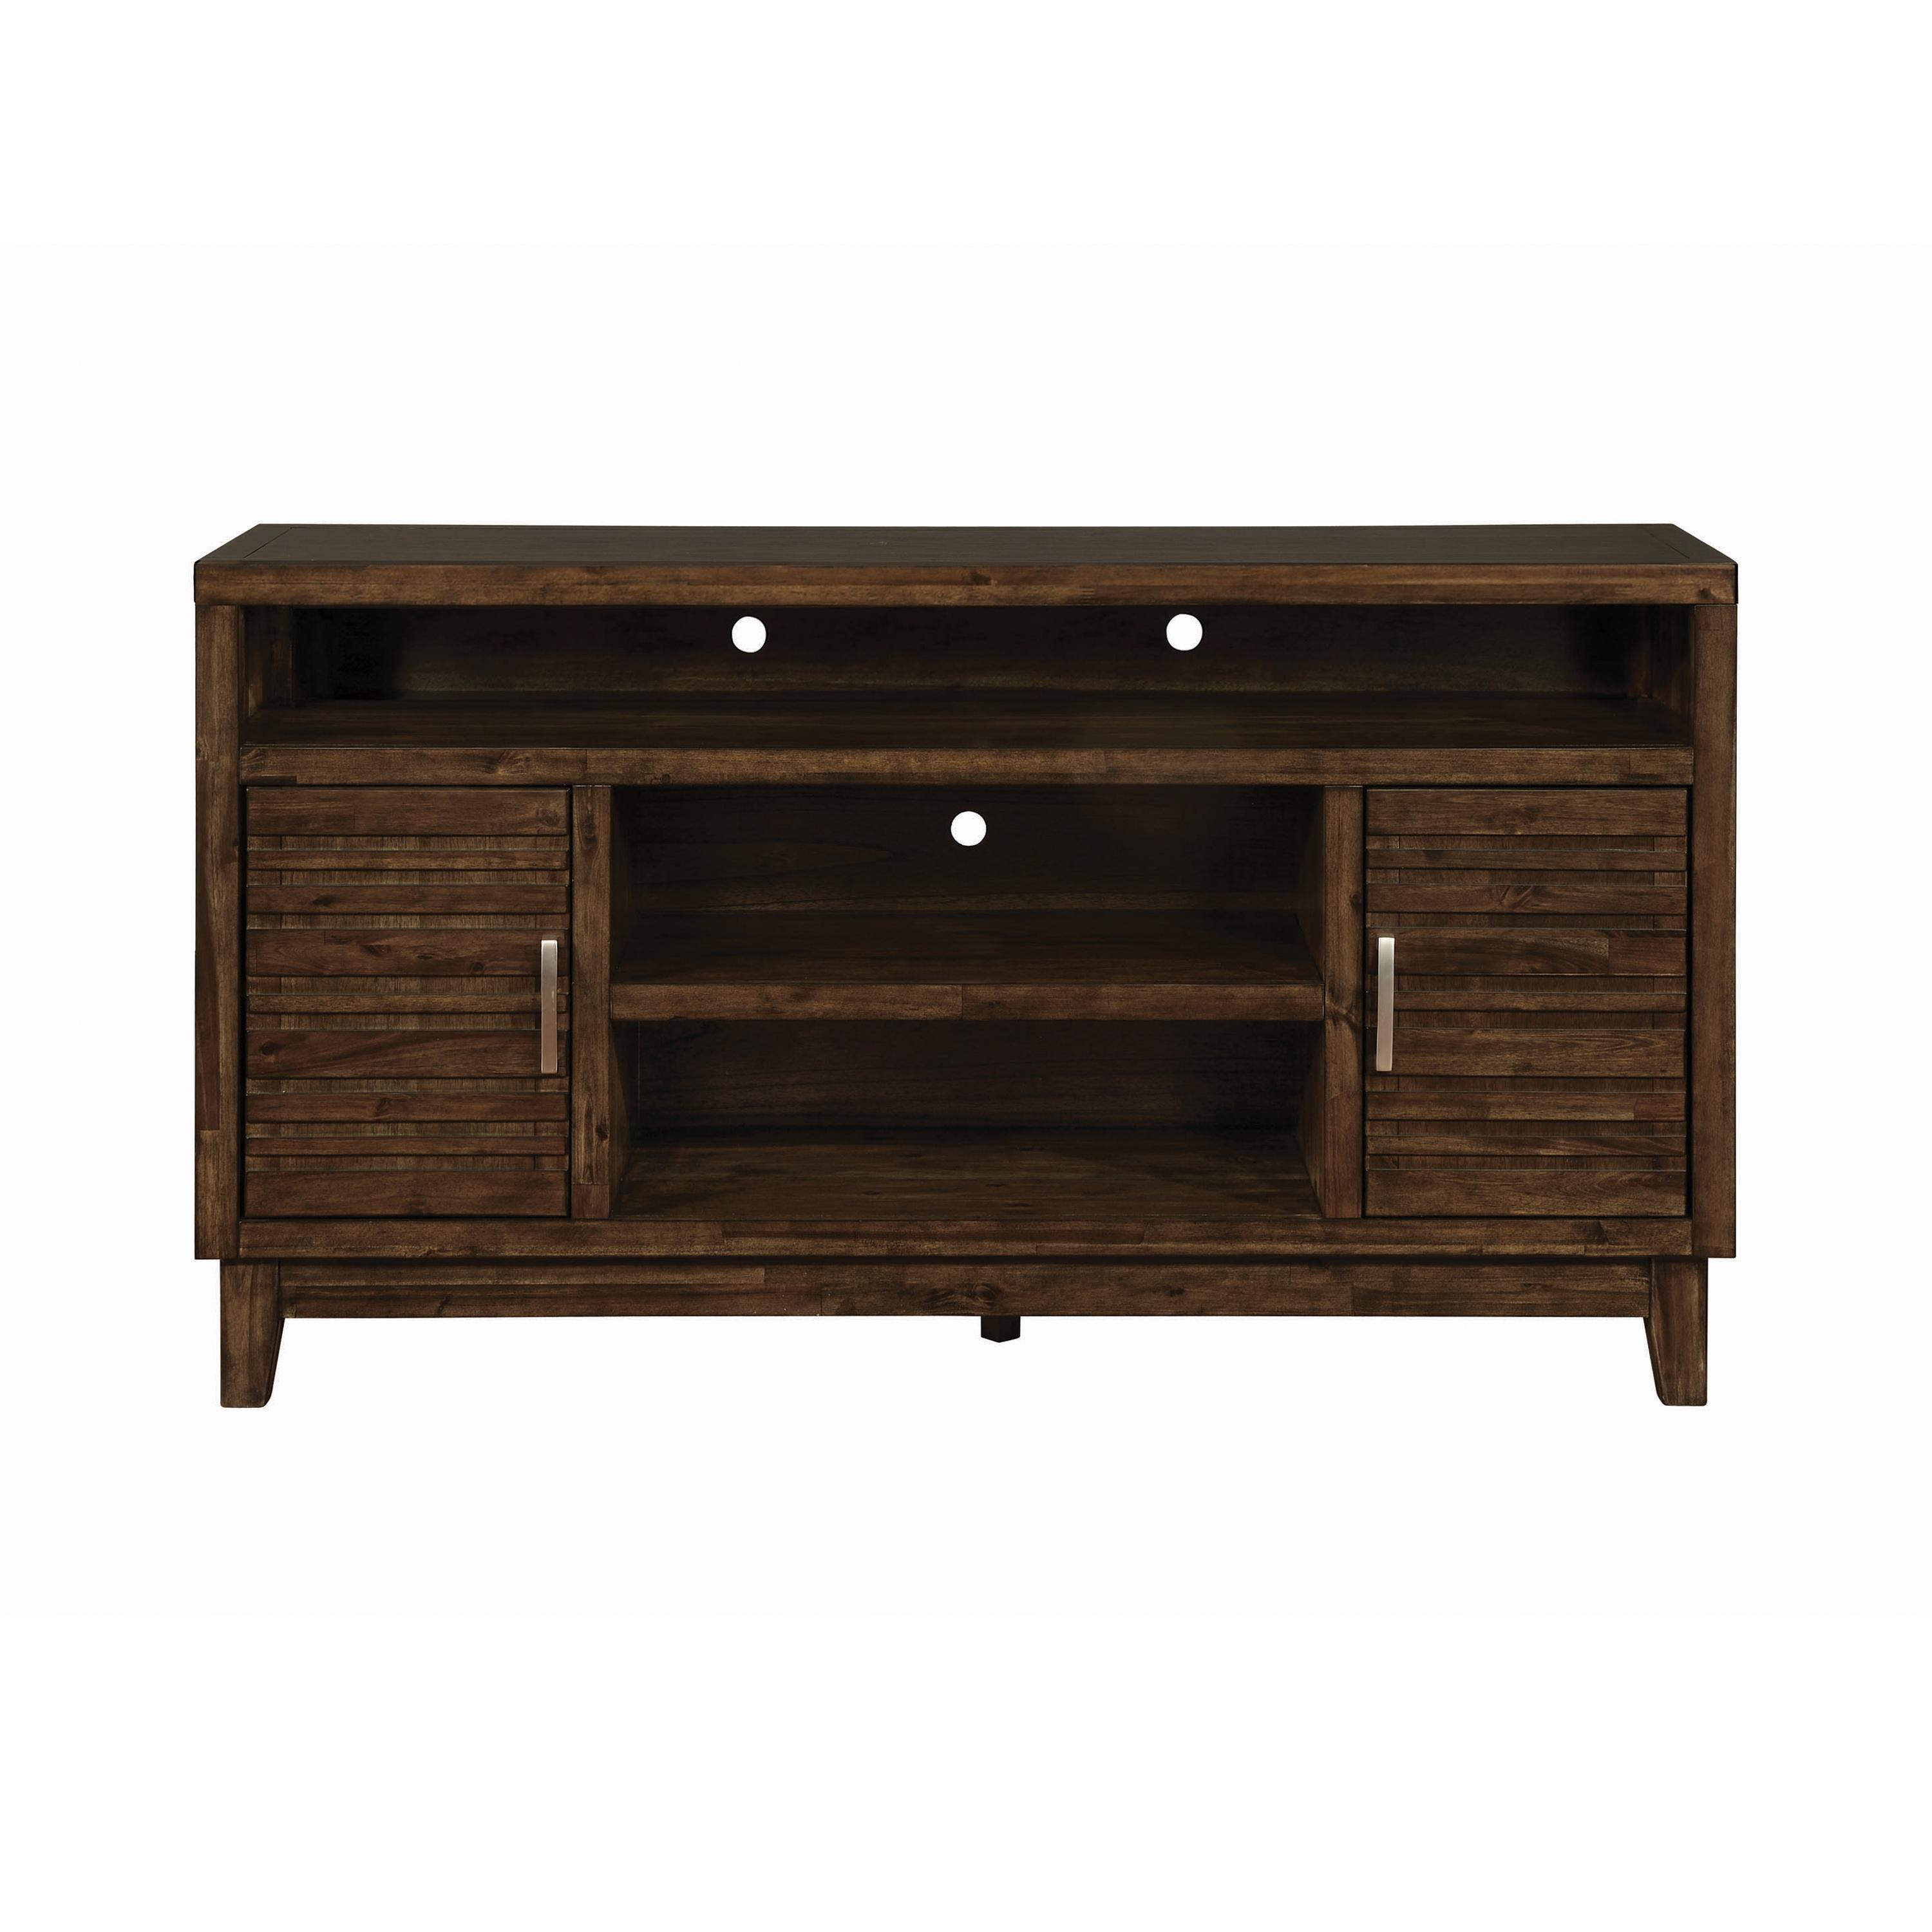 Transitional Tv Console 704241 704241 in Brown 